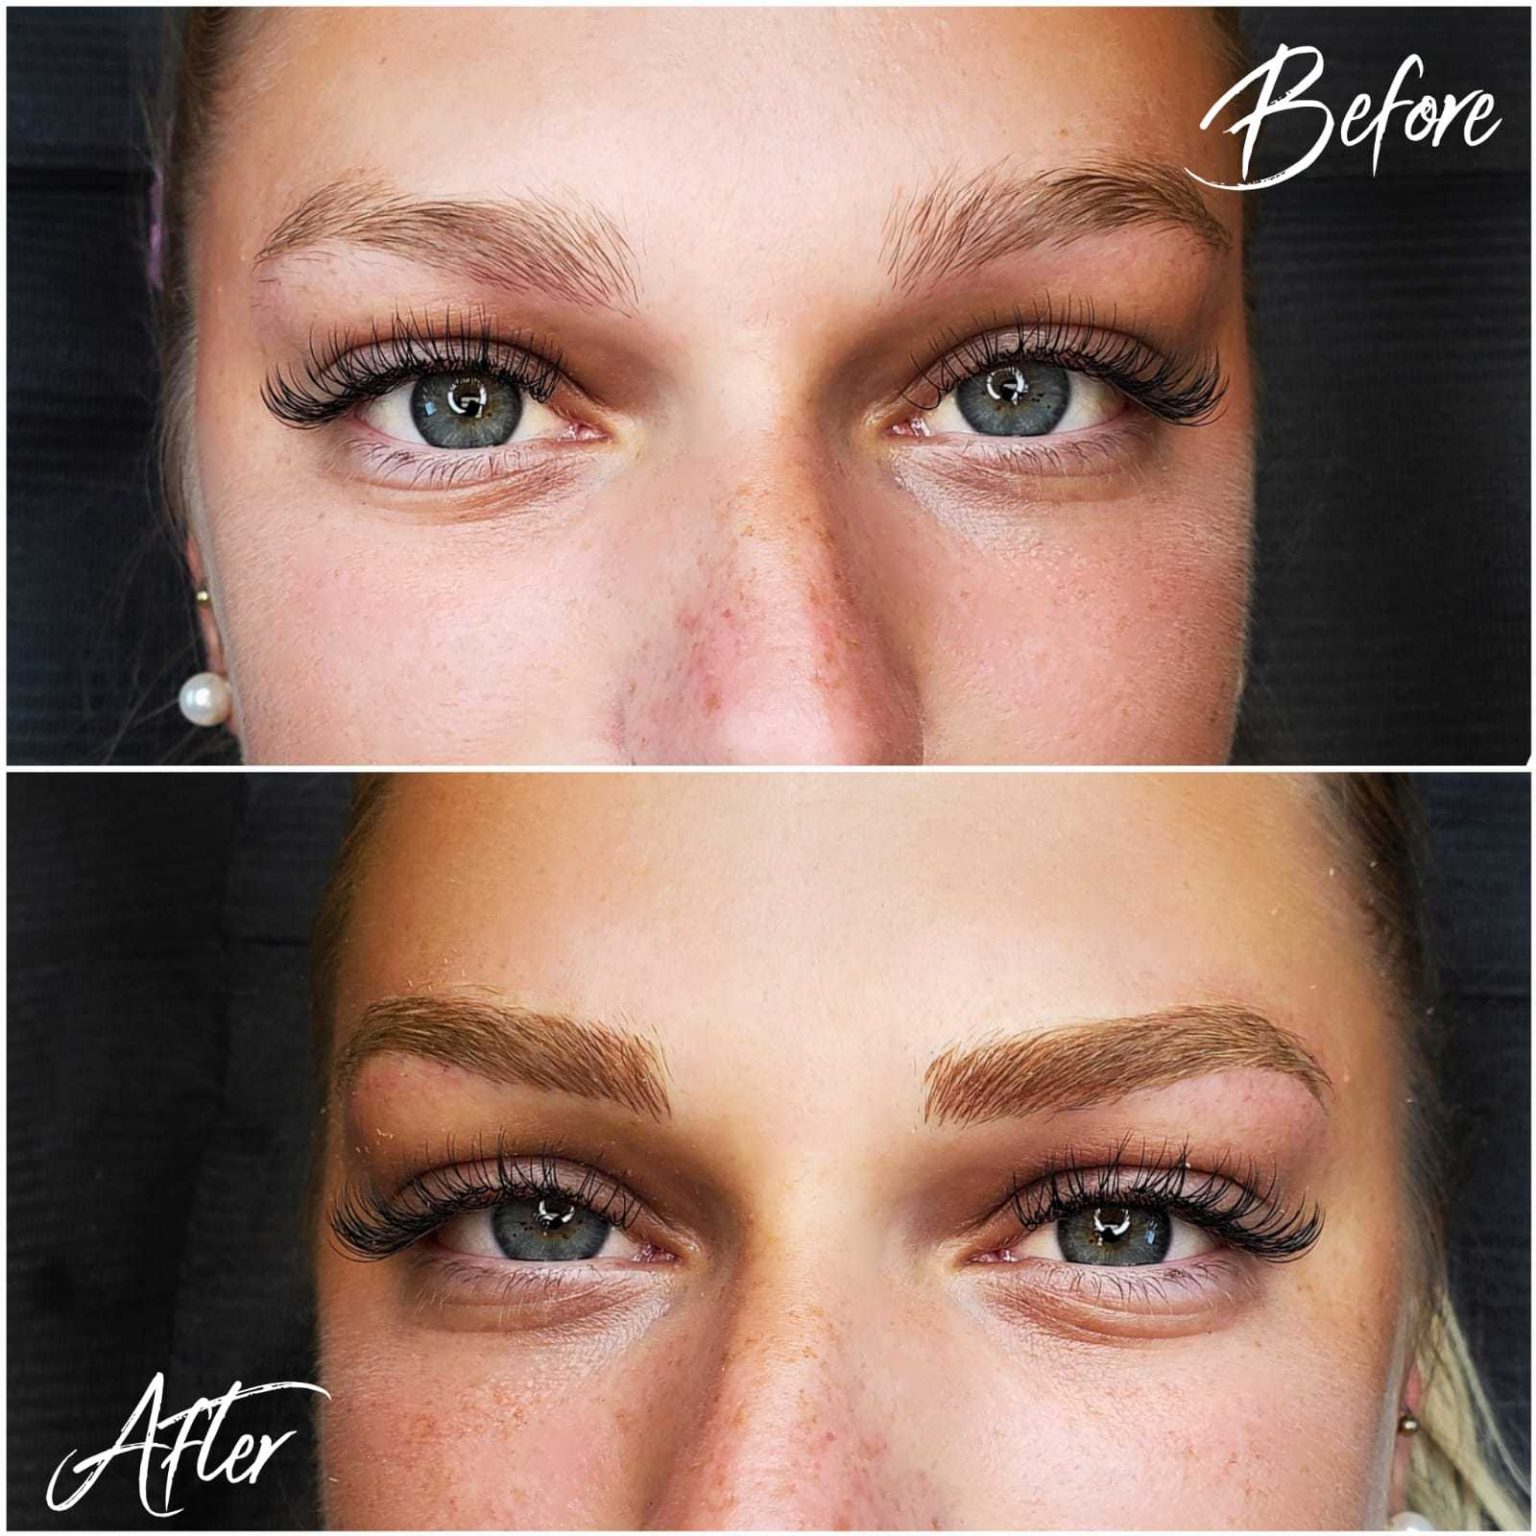 5 Benefits Of Getting Eyebrow Microblading Services Lashboutiquefl 